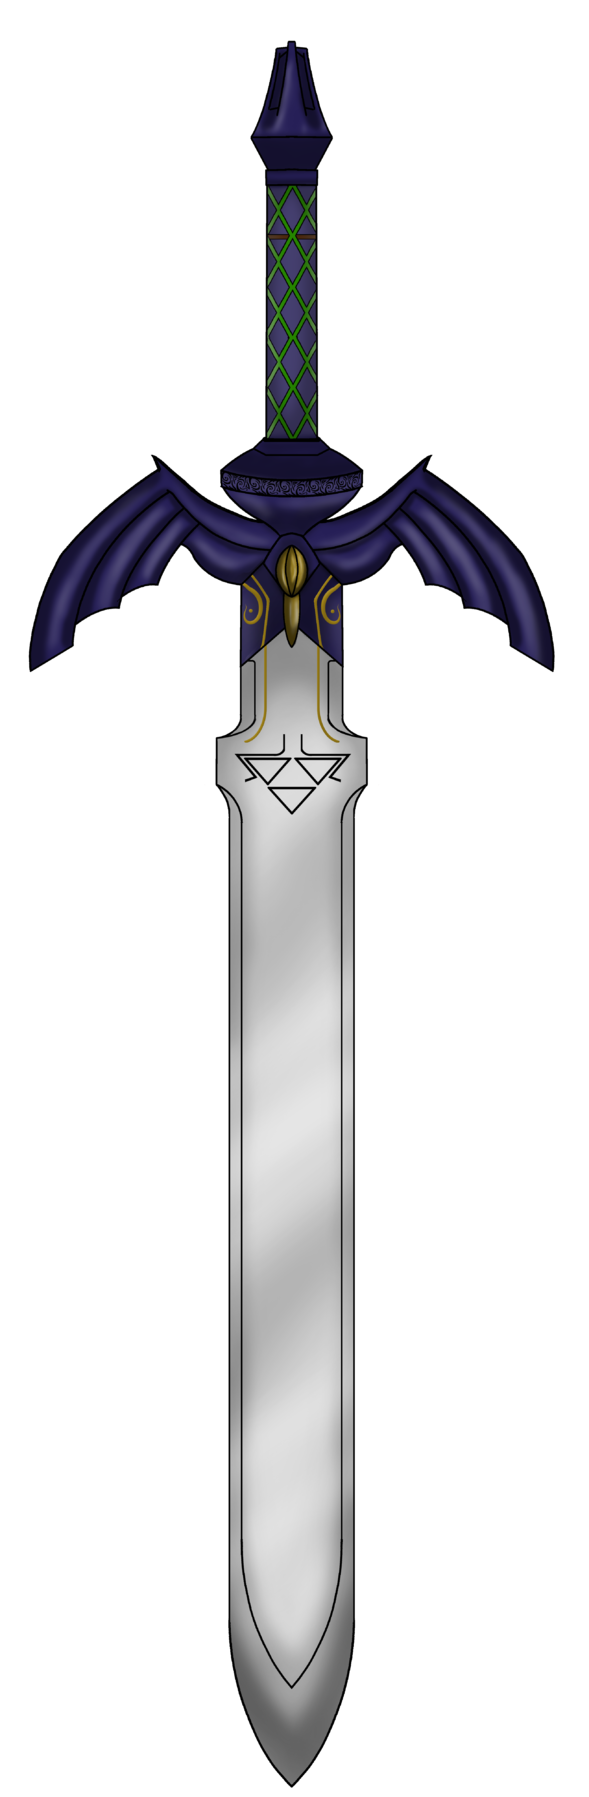 Master Sword clipart #9, Download drawings